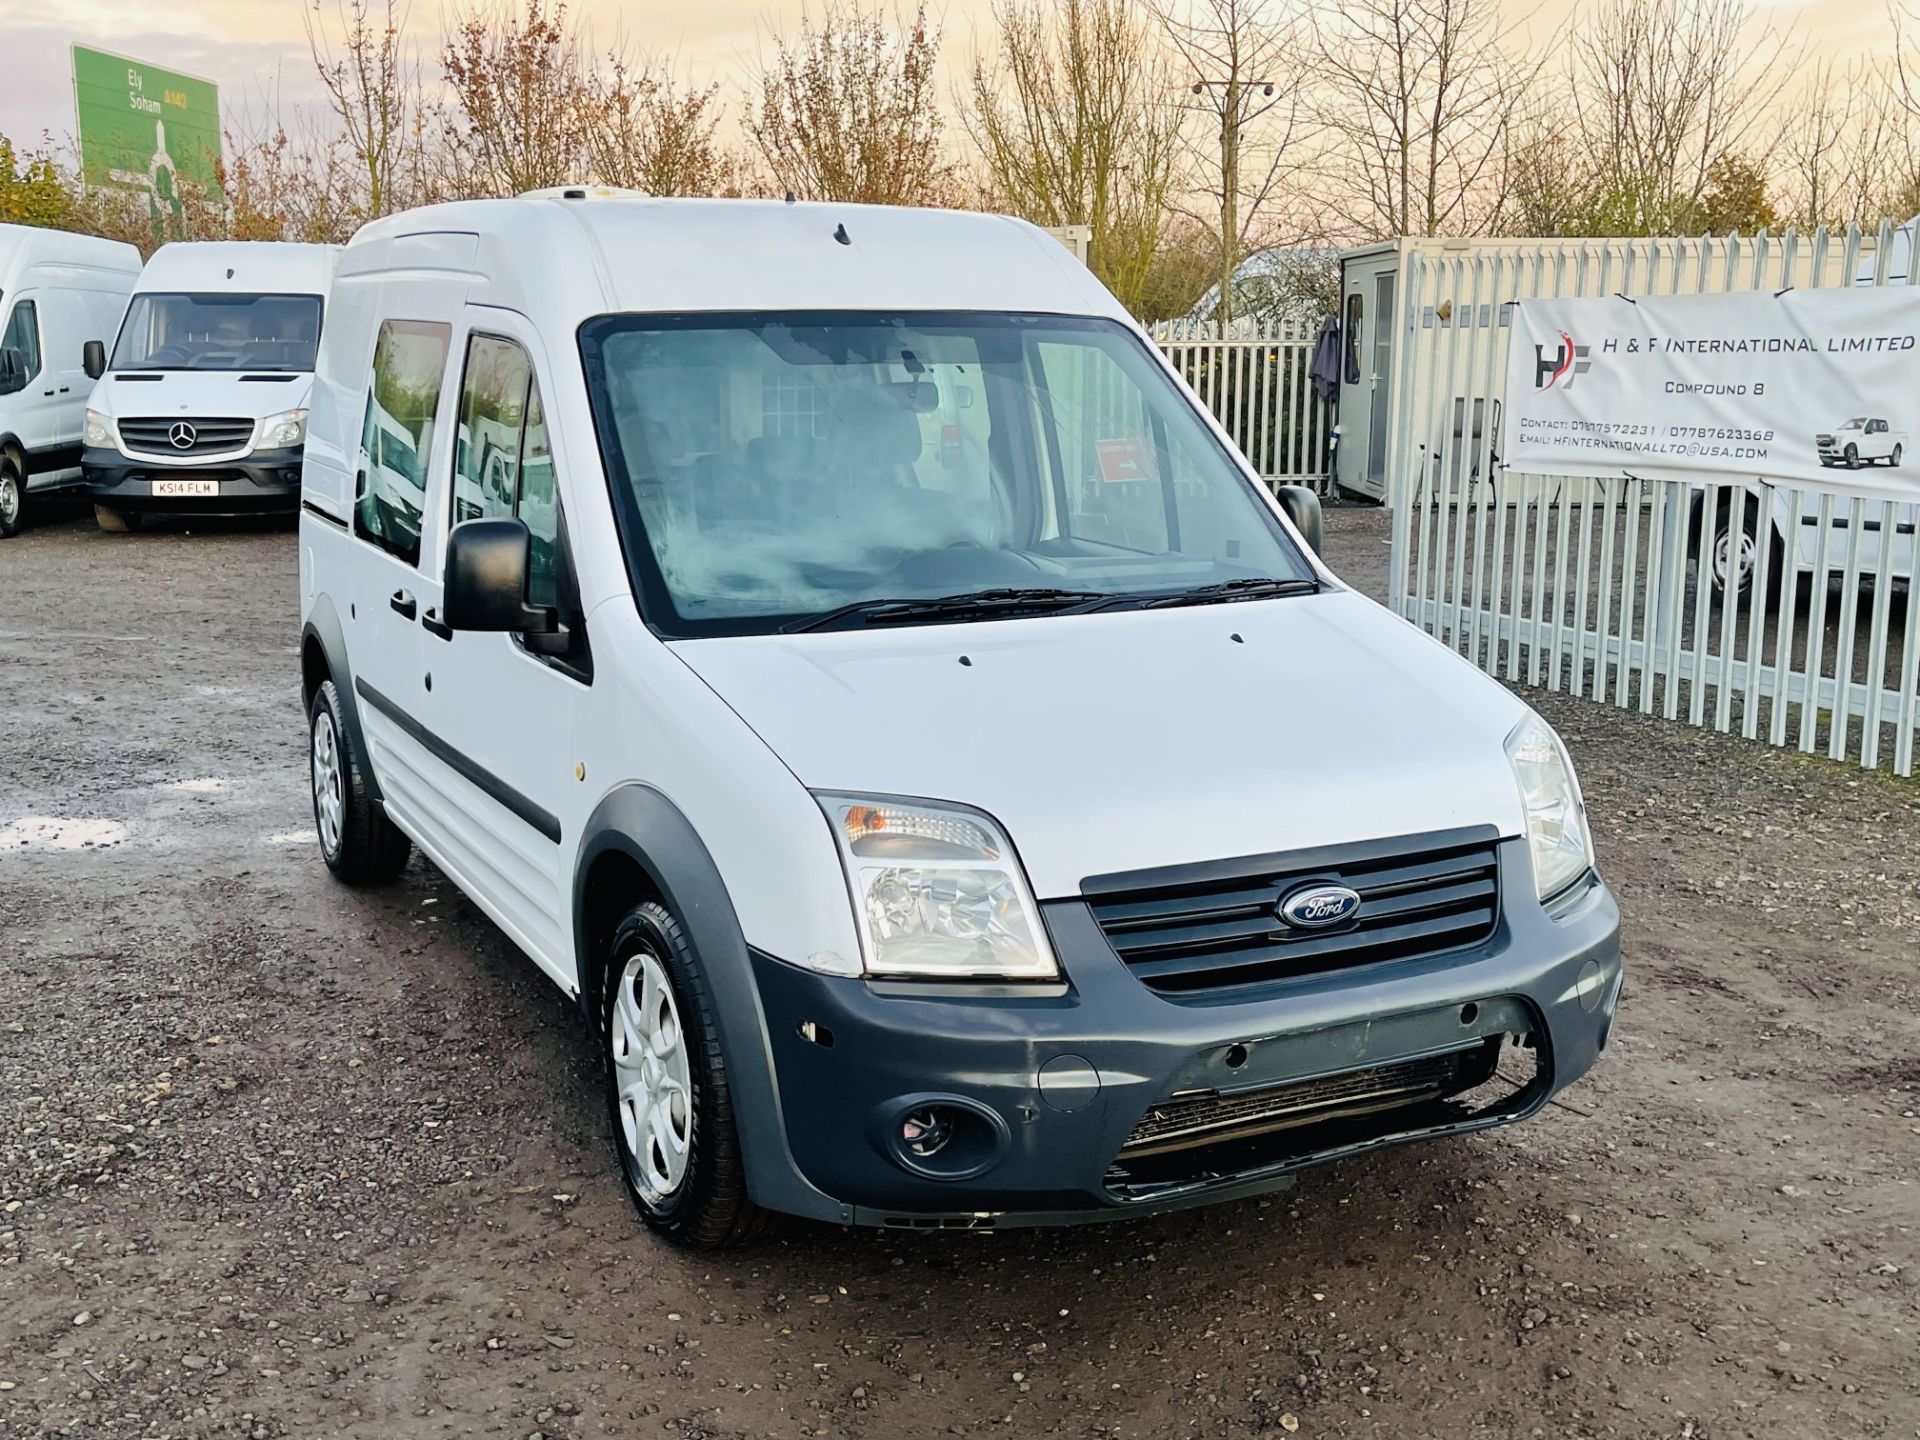 Ford Transit connect 1.8 TDCI LWB High Roof 2013 '13 Reg' A/C Elec pack - Image 2 of 21